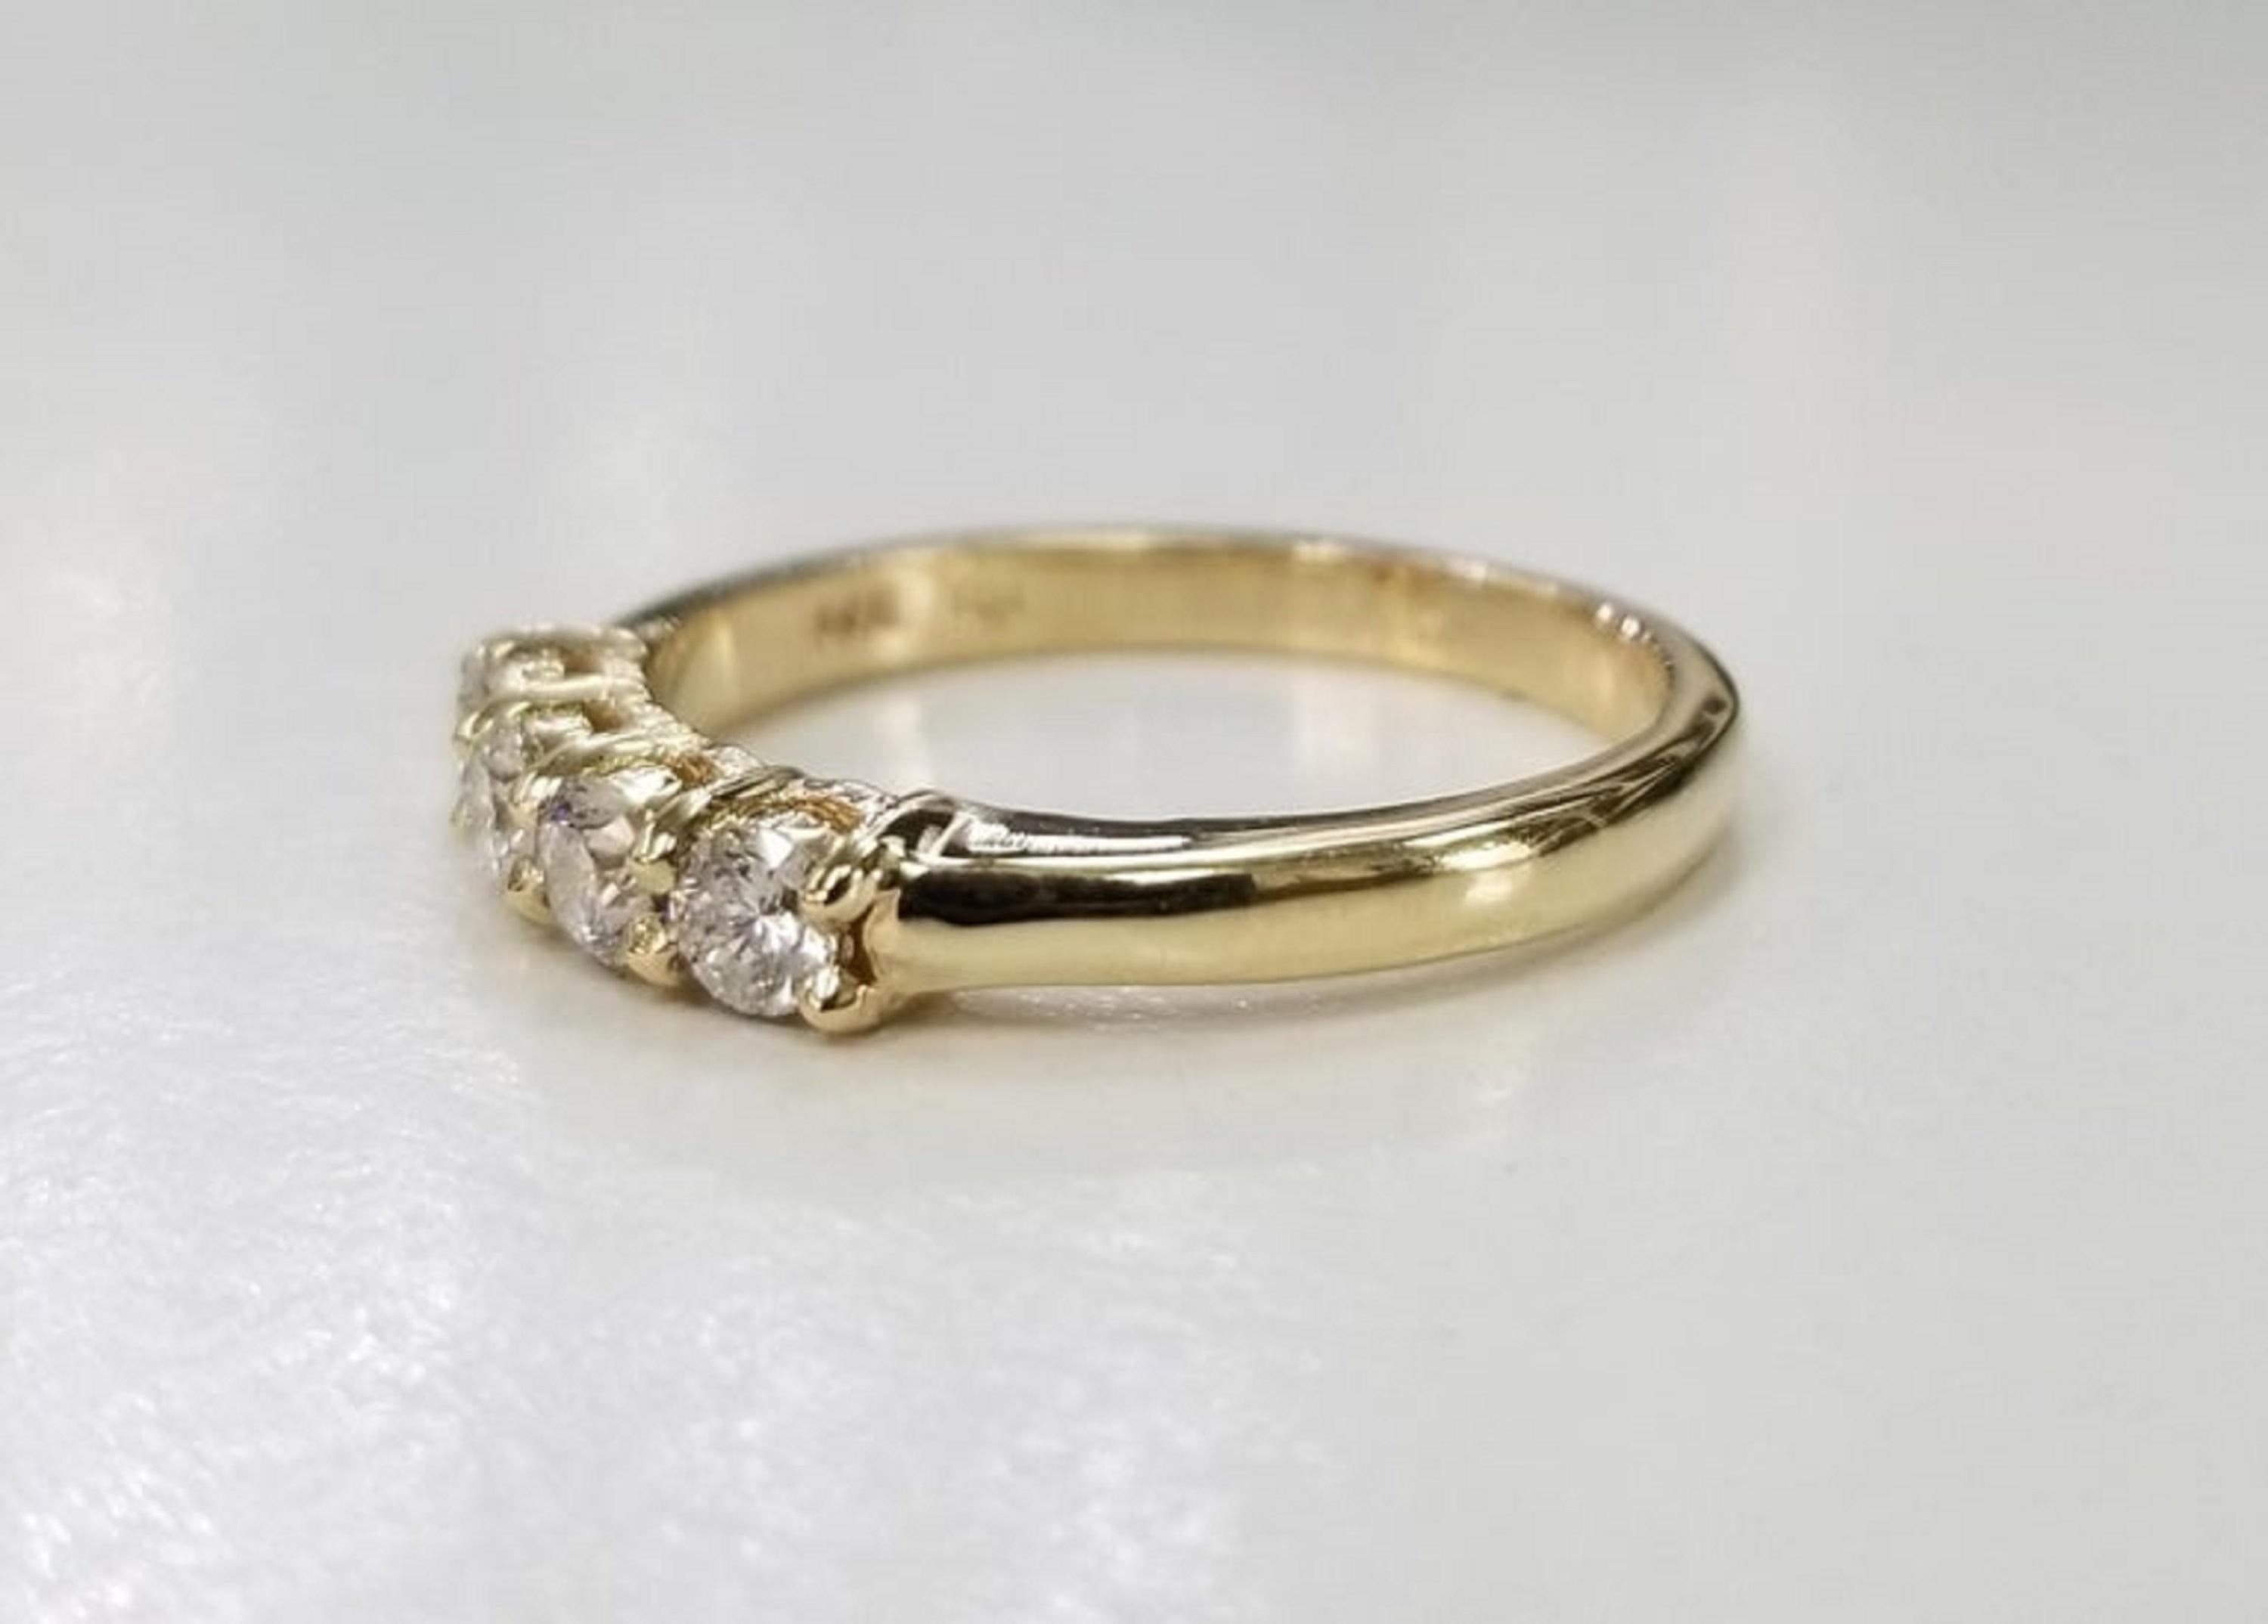 14k yellow gold 4 diamond ring wedding anniversary ring .44pts., containing 4 round full cut diamonds of very nice quality weighing .44pts.  ring size is 7 and can be sized to fir for free.  You can have this in either white or yellow gold.